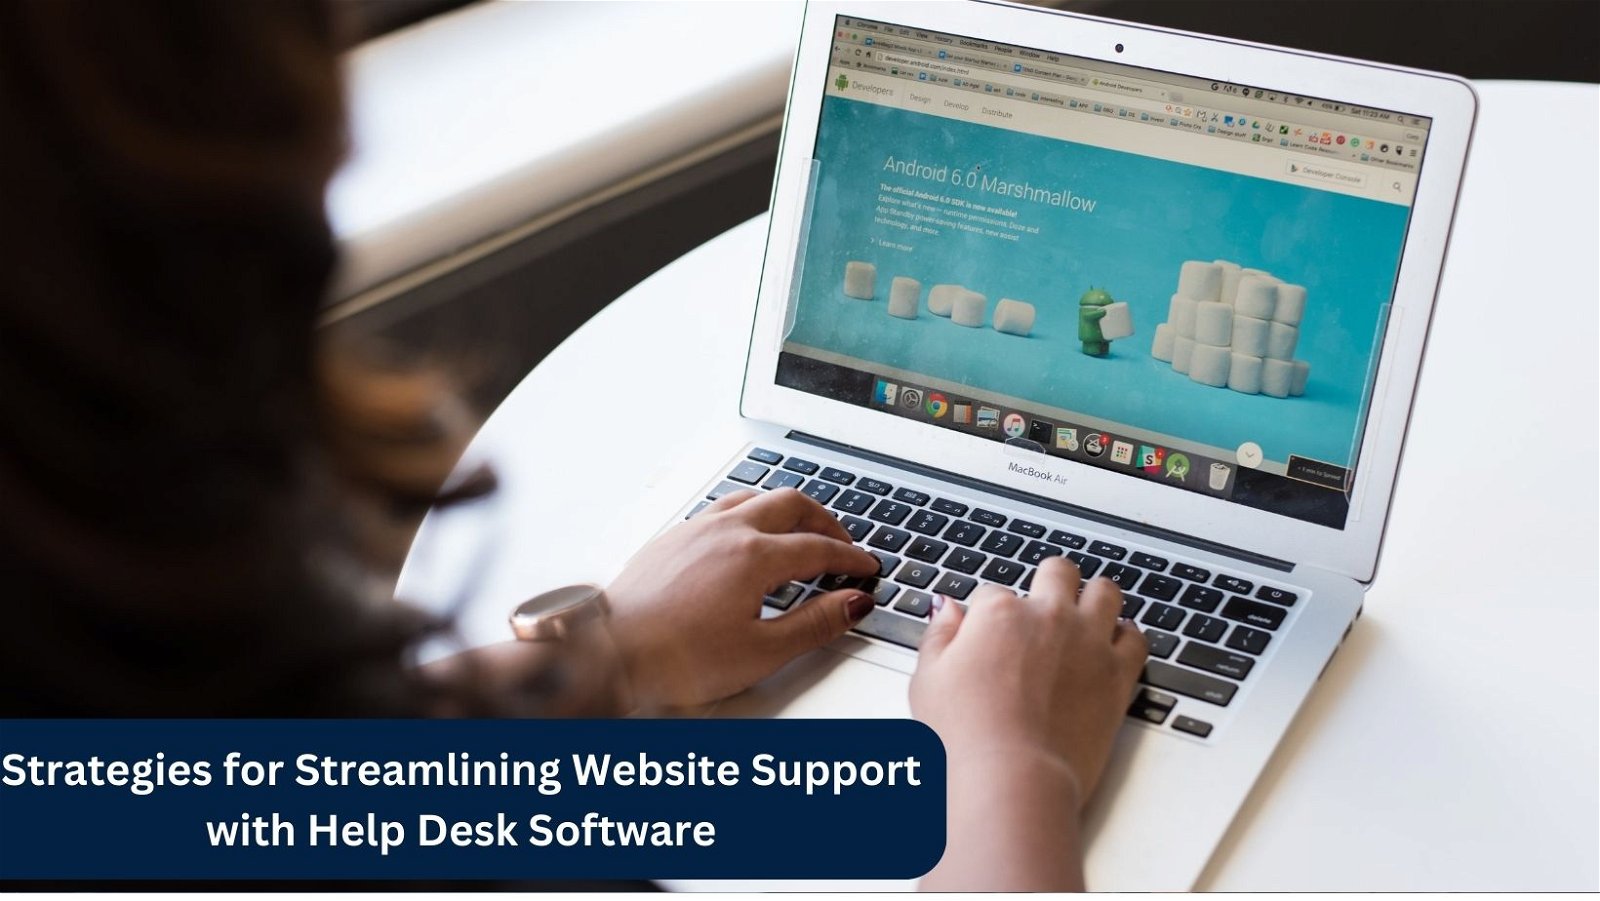 Strategies for Streamlining Website Support with Help Desk Software